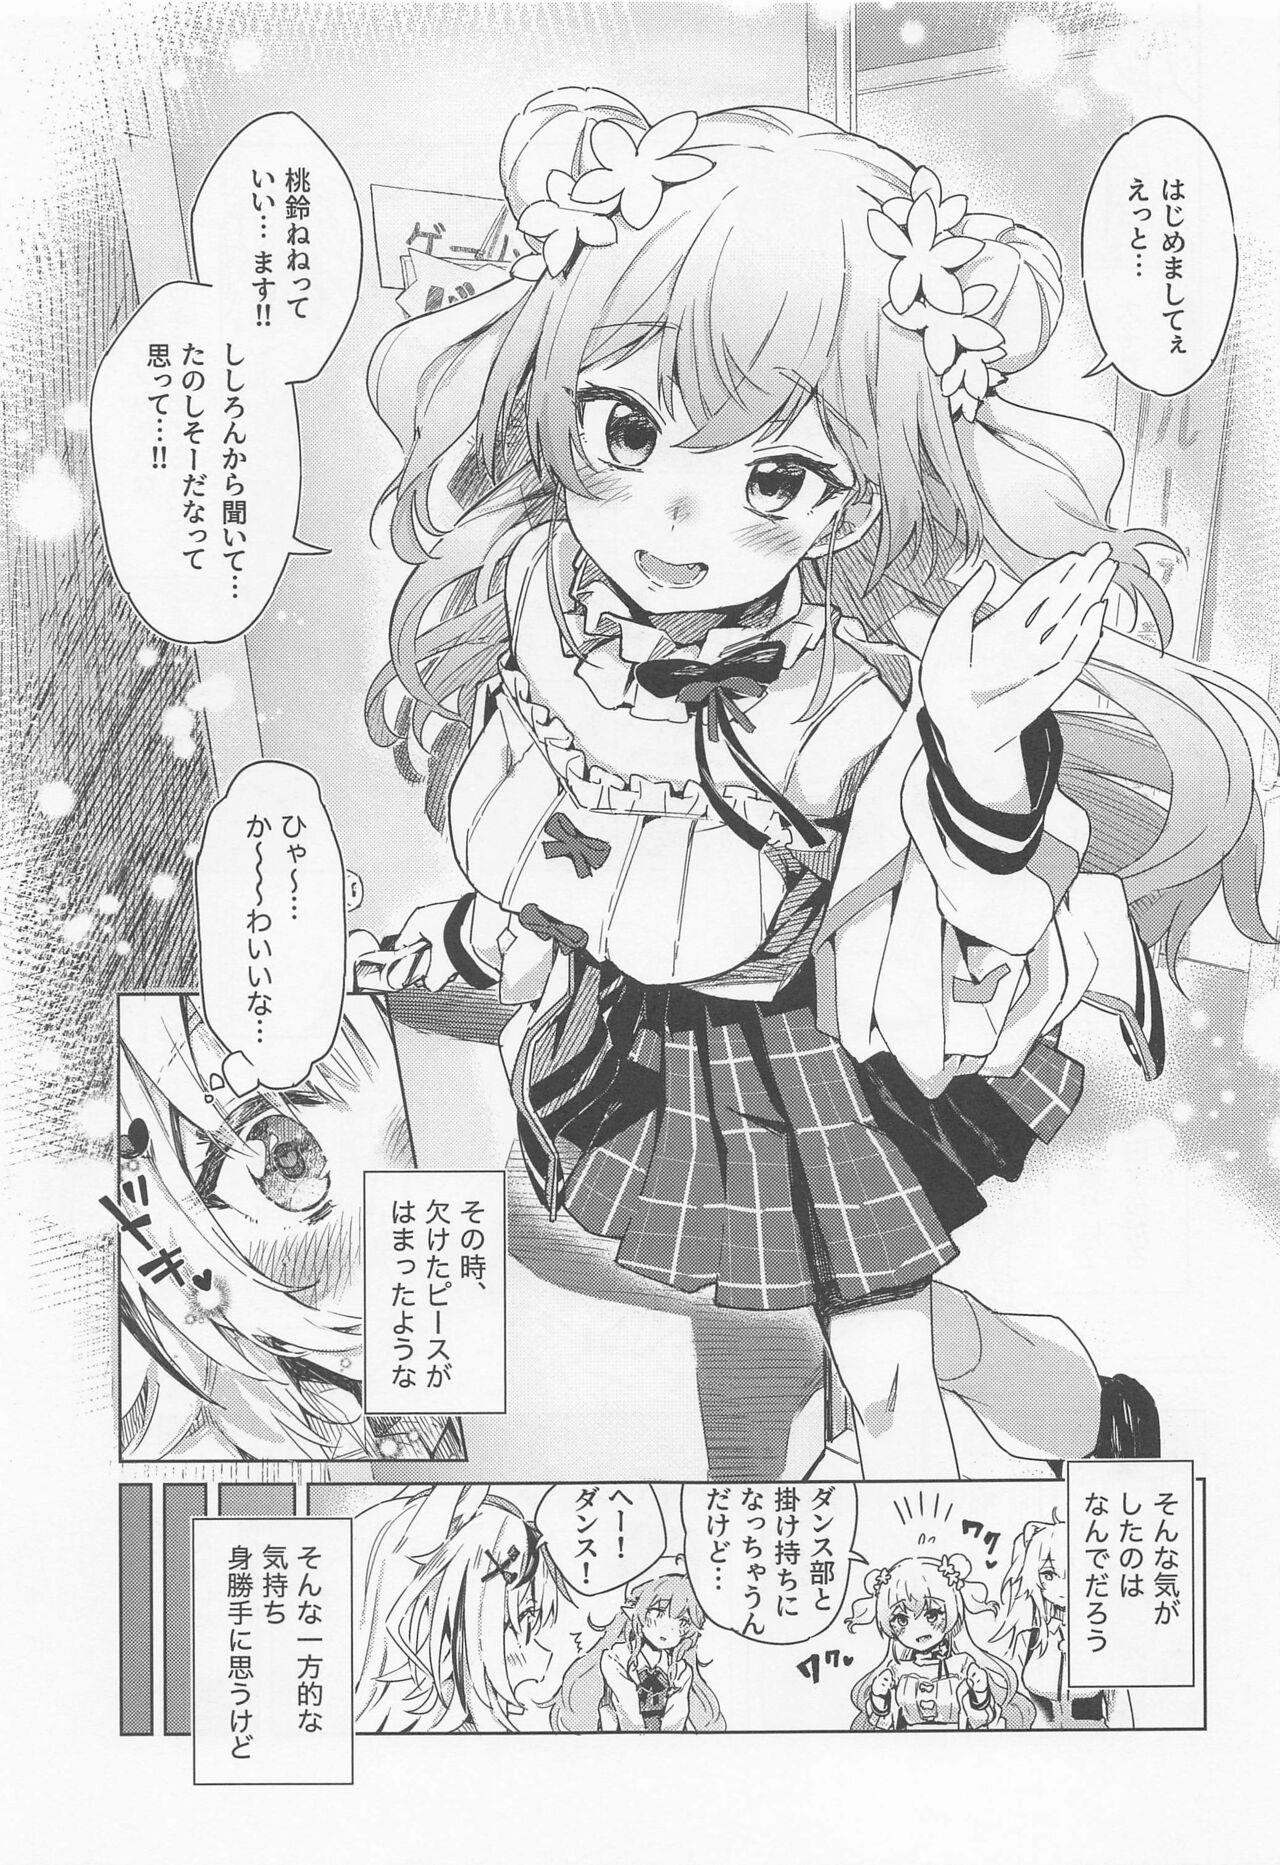 Blond Fennec wa Iseijin no Yume o Miru ka - Does The Fennec Dream of The Lovely Visitor? - Hololive Mamando - Page 4